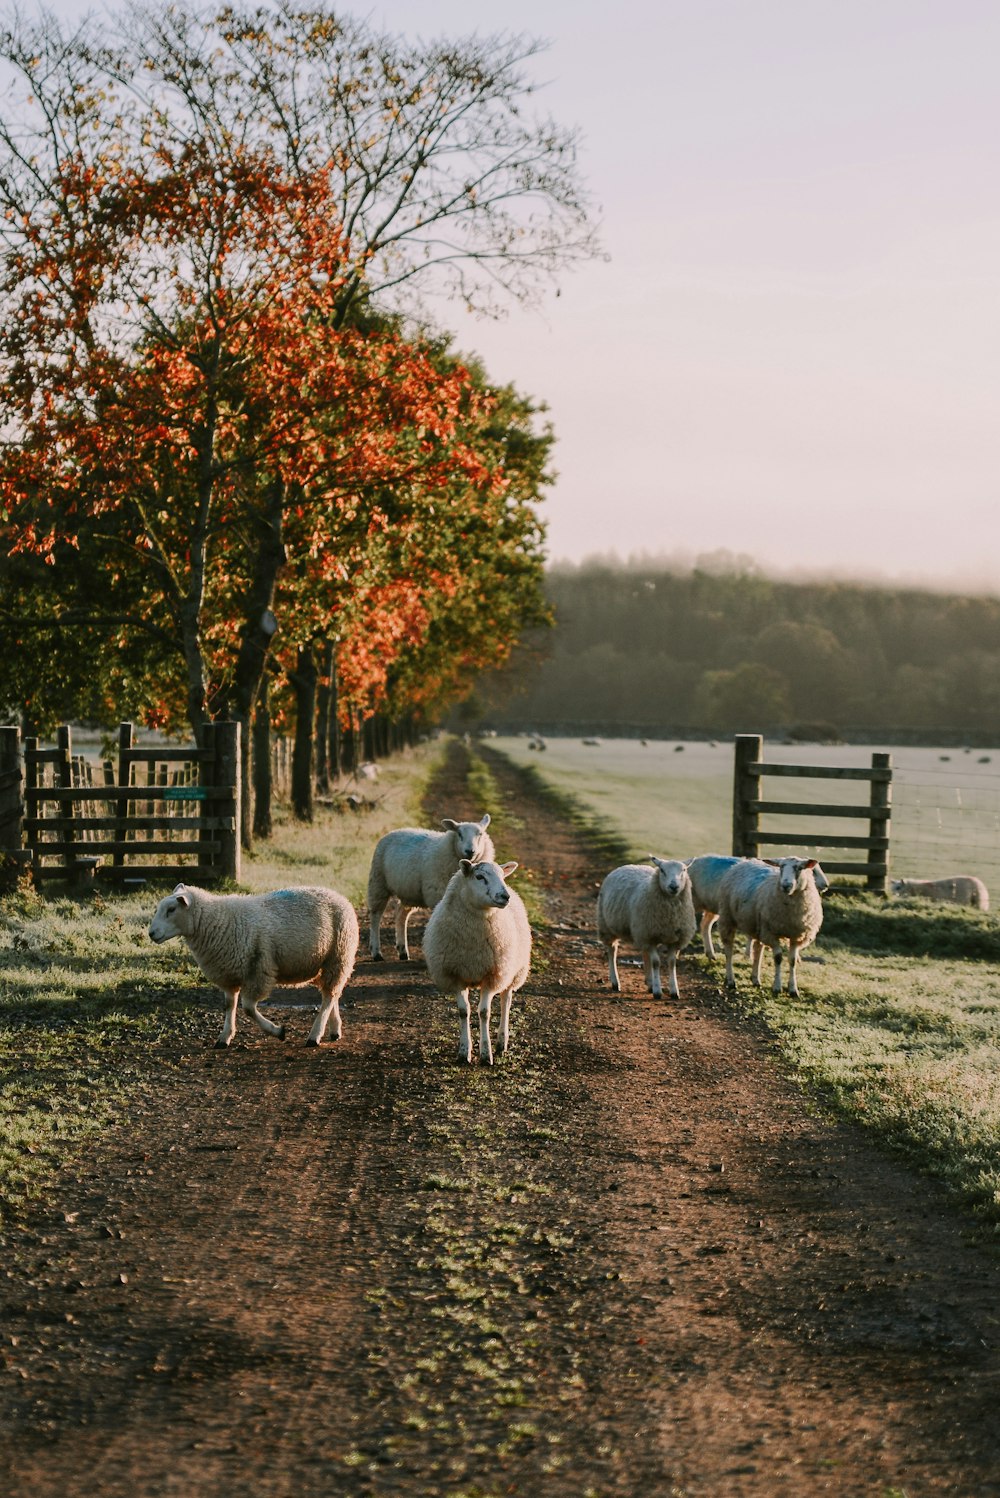 a group of sheep on a dirt road